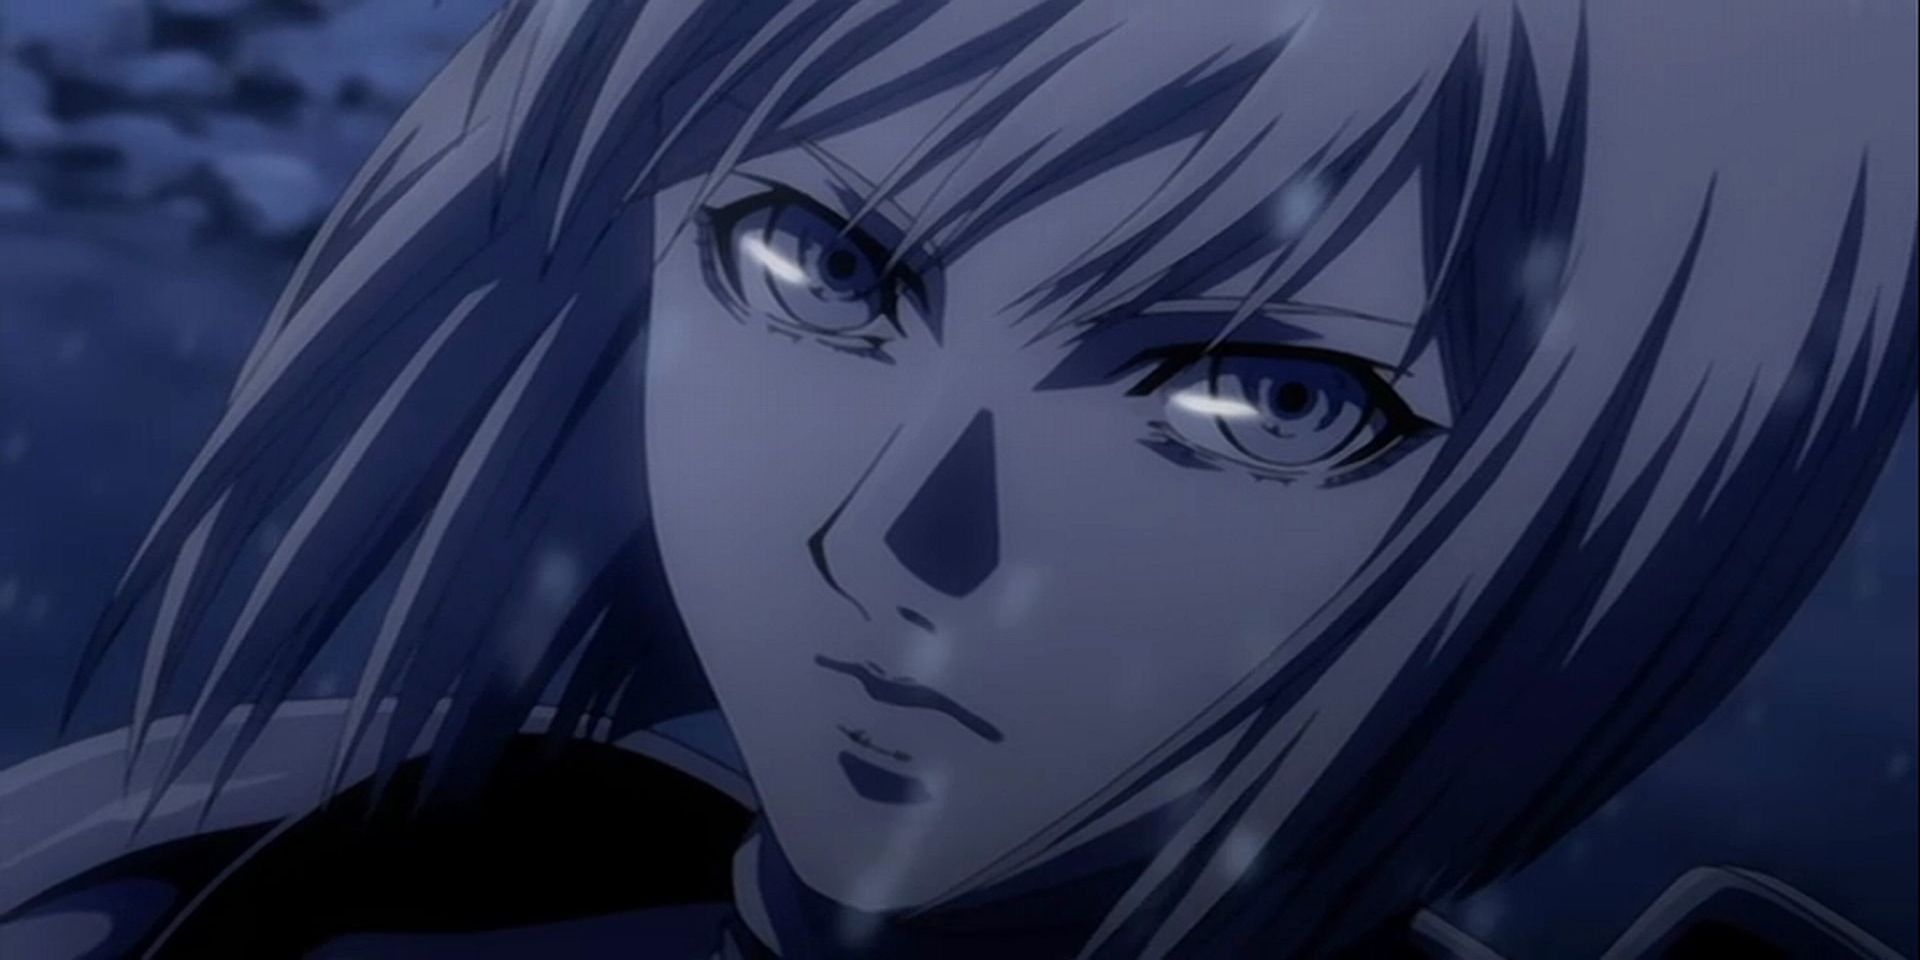 A character from the 2007 anime series Claymore.